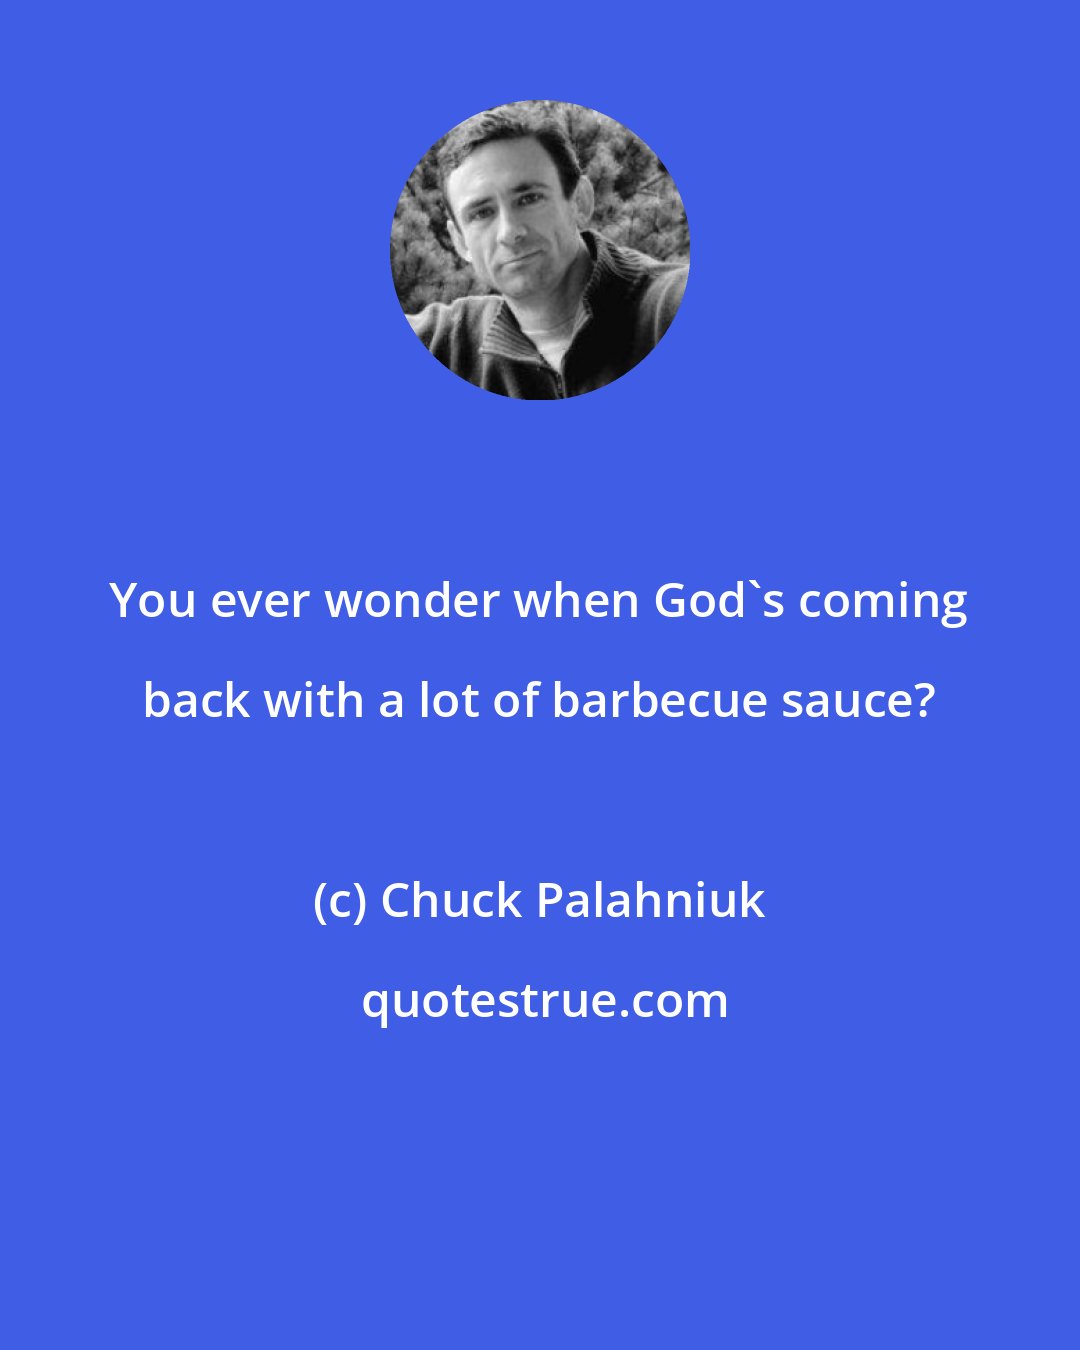 Chuck Palahniuk: You ever wonder when God's coming back with a lot of barbecue sauce?